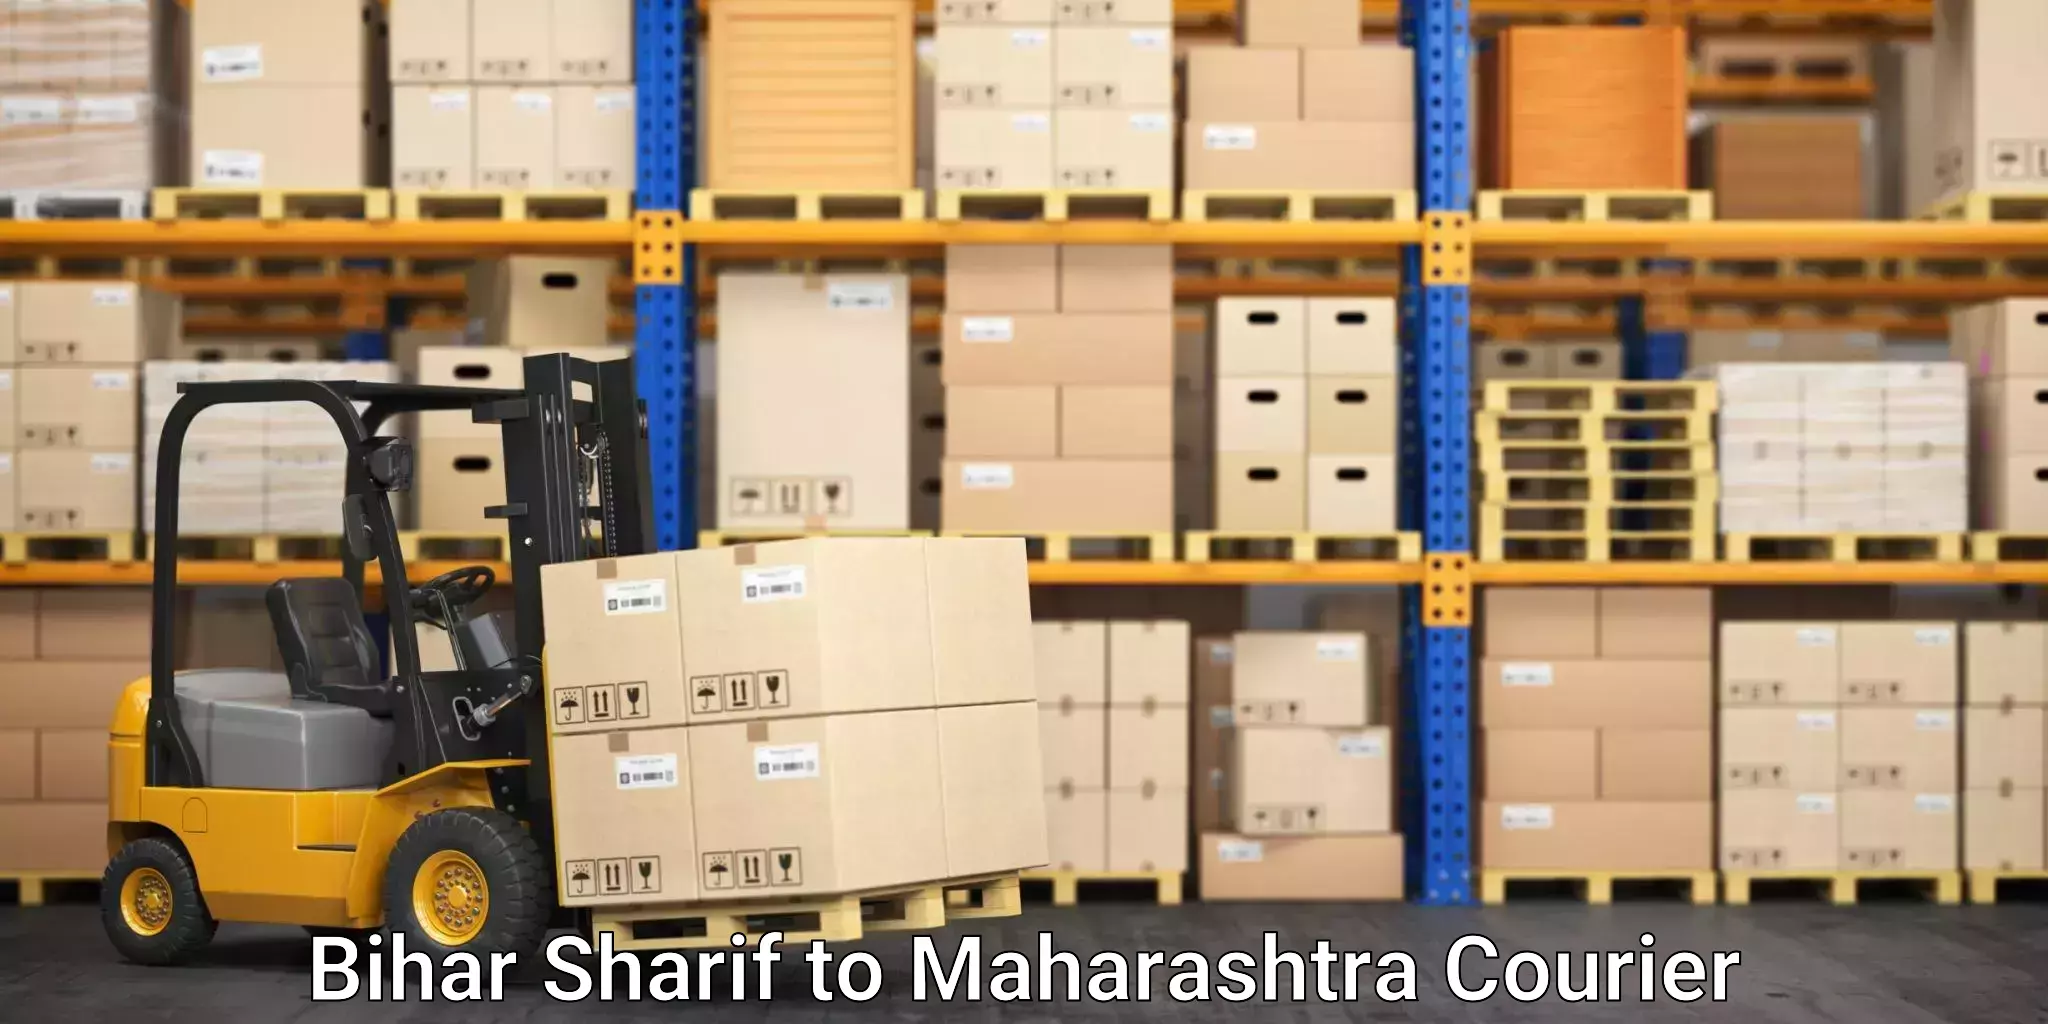 Dependable moving services in Bihar Sharif to Pune